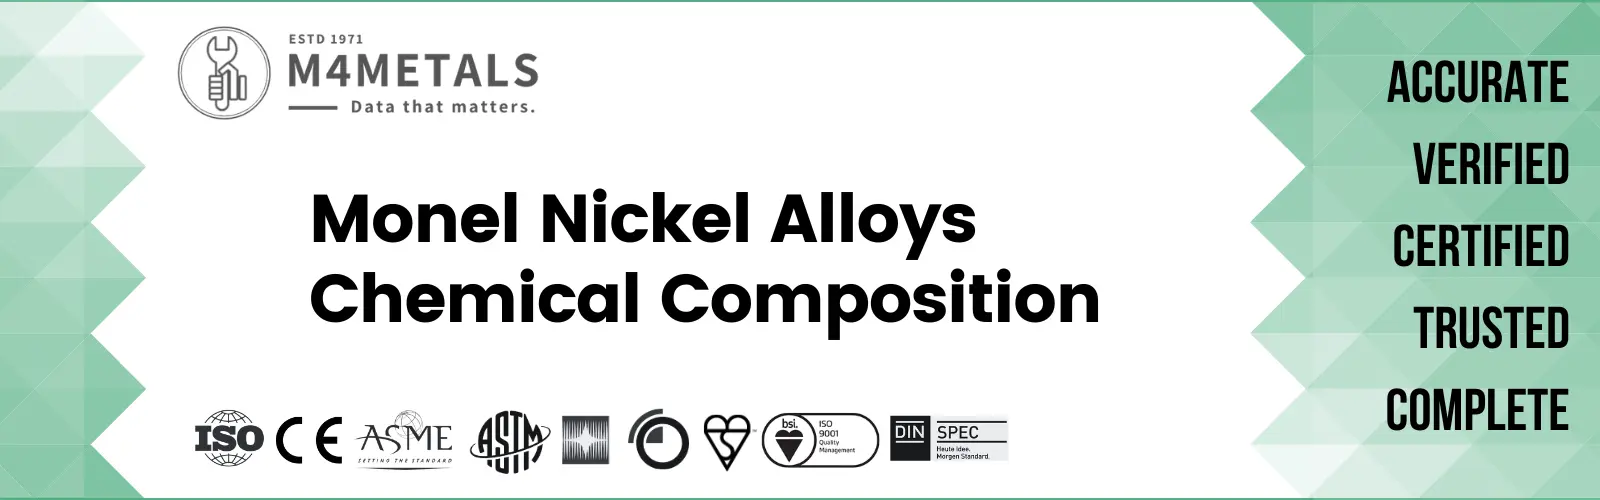 Monel Nickel-alloy Chemical Composition